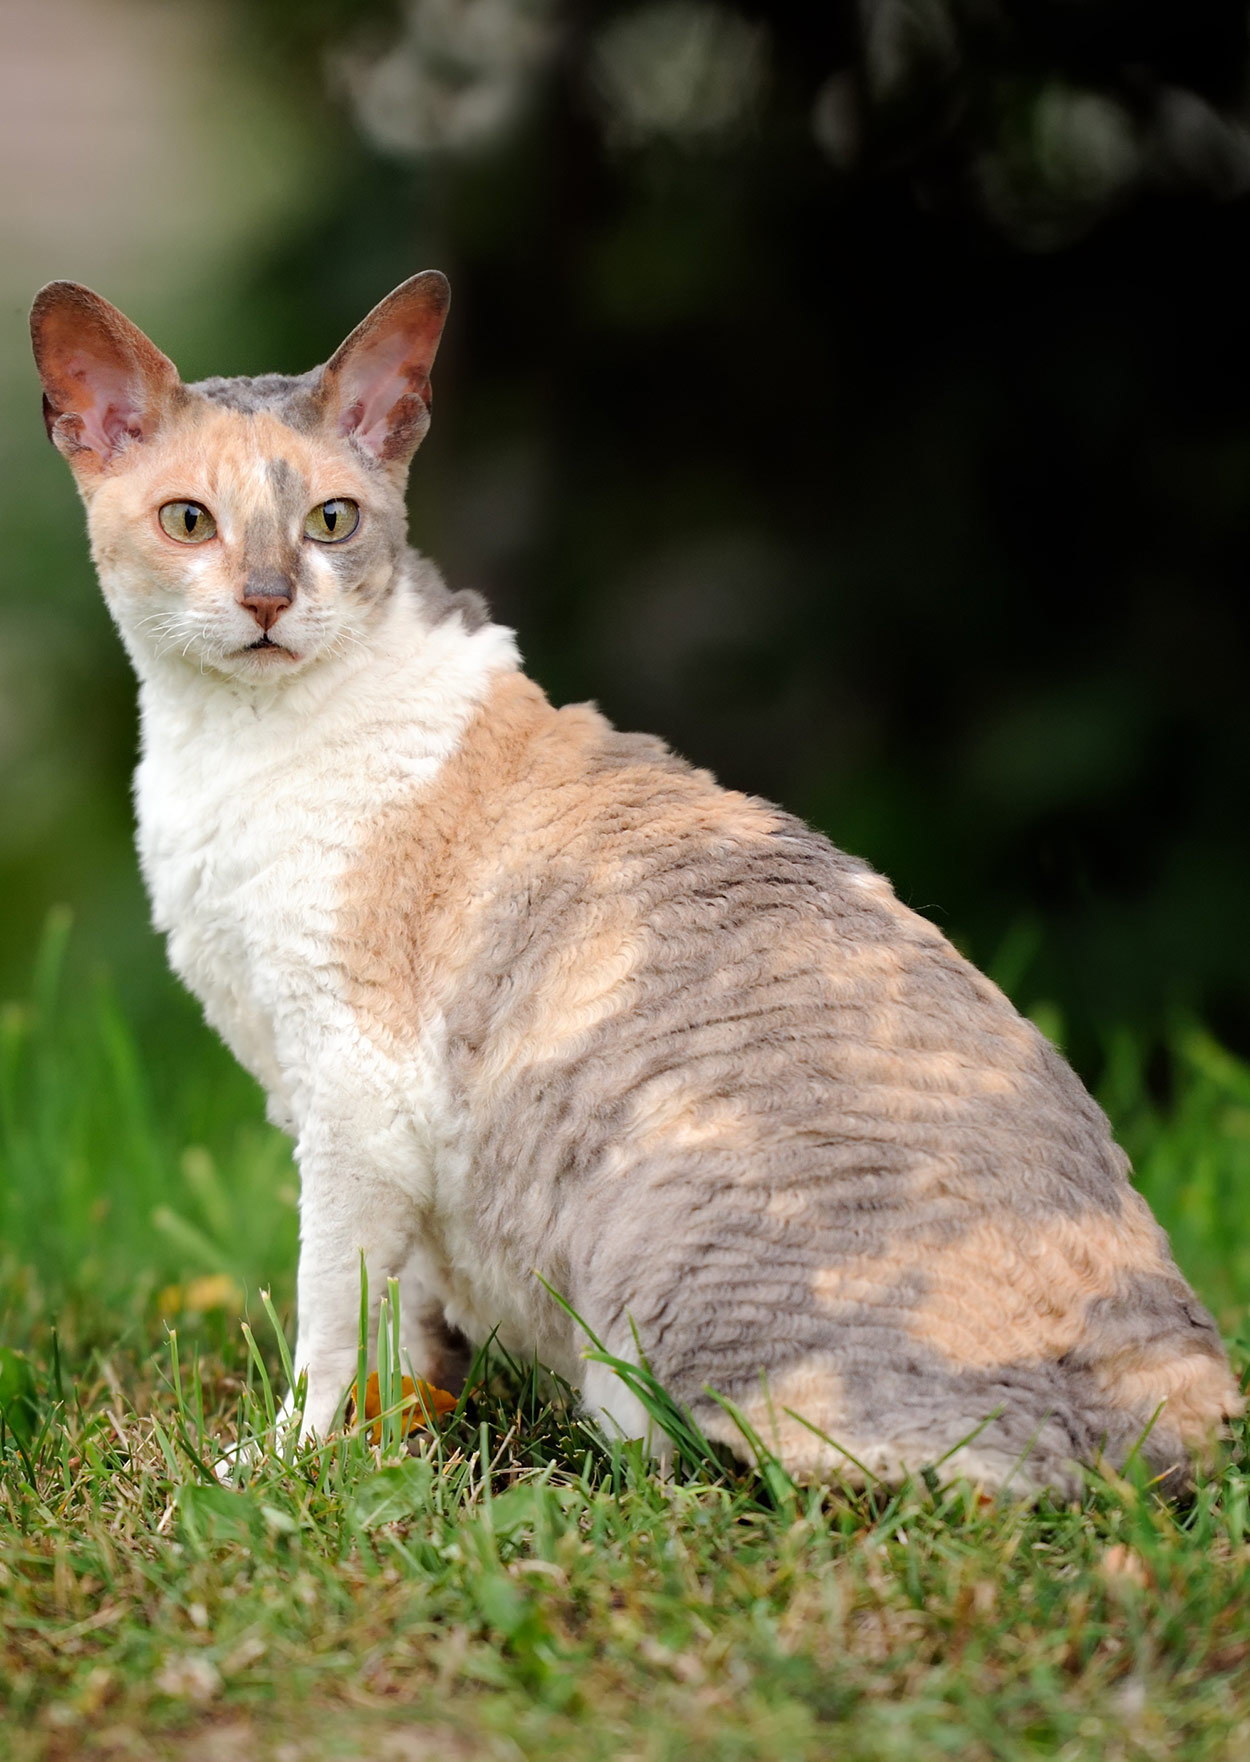 Cornish Rex Your Complete Guide To A Curly Coated Cat